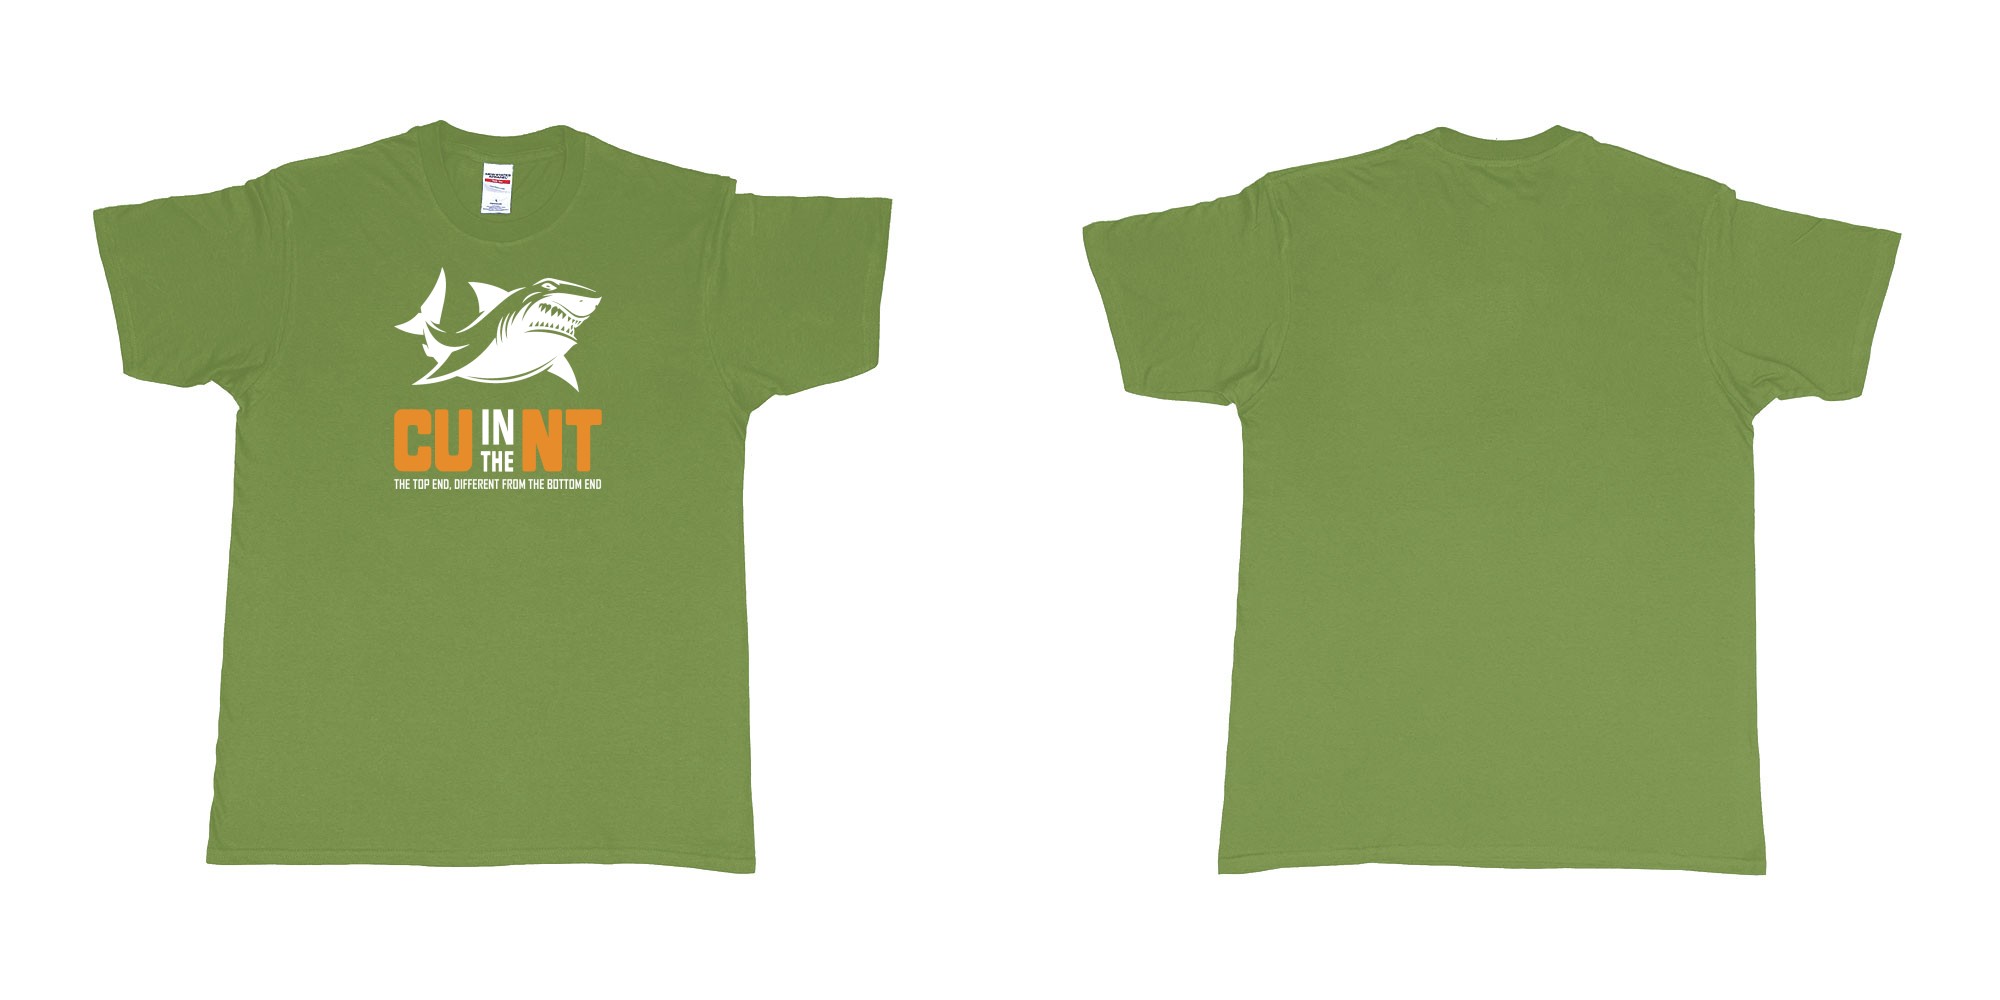 Custom tshirt design cu in the nt northern territory shark in fabric color military-green choice your own text made in Bali by The Pirate Way